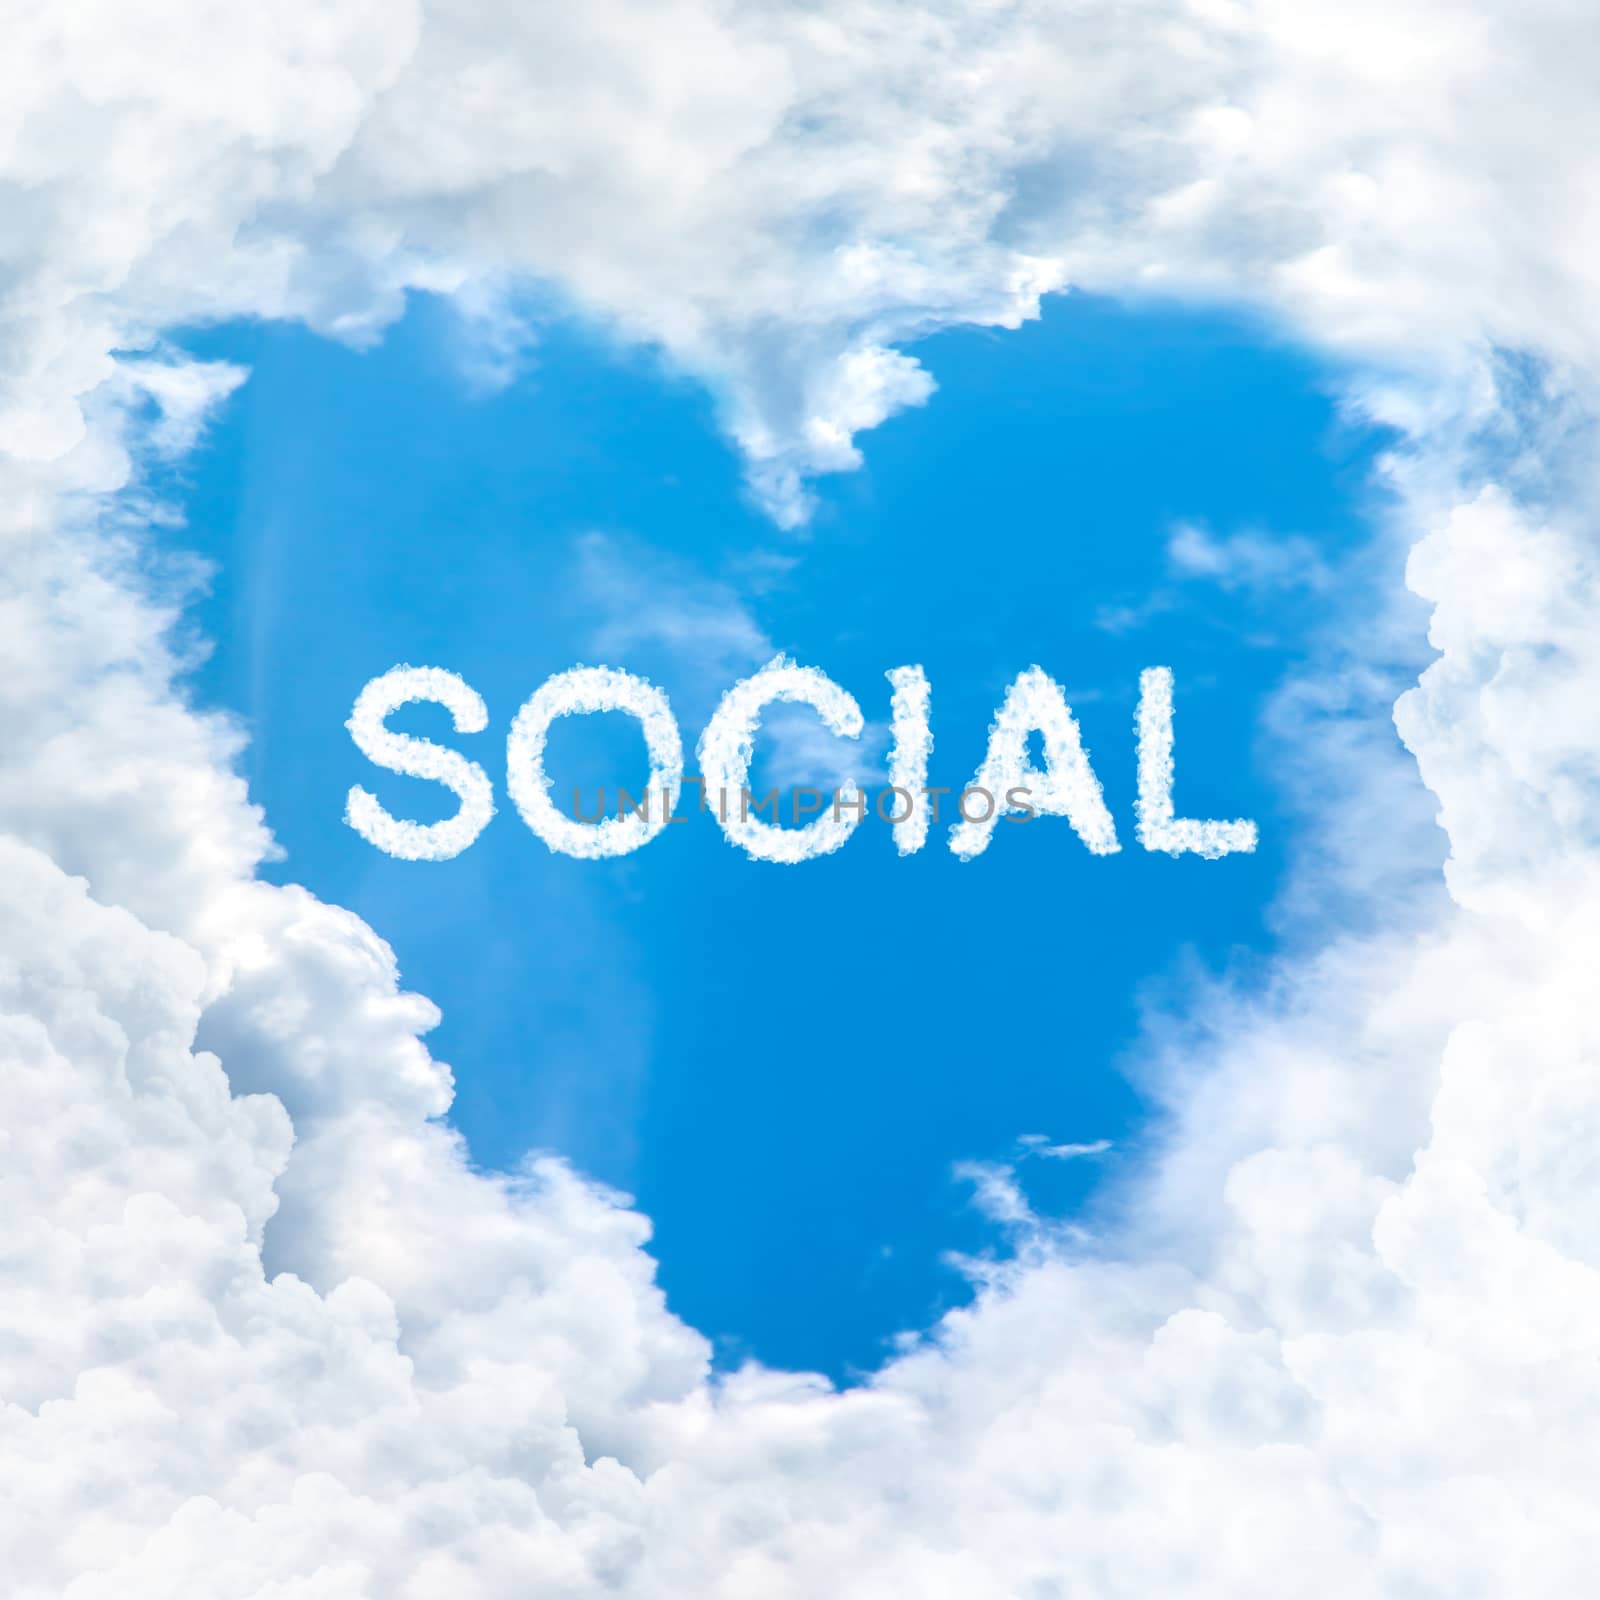 social word cloud gradient blue sky background only